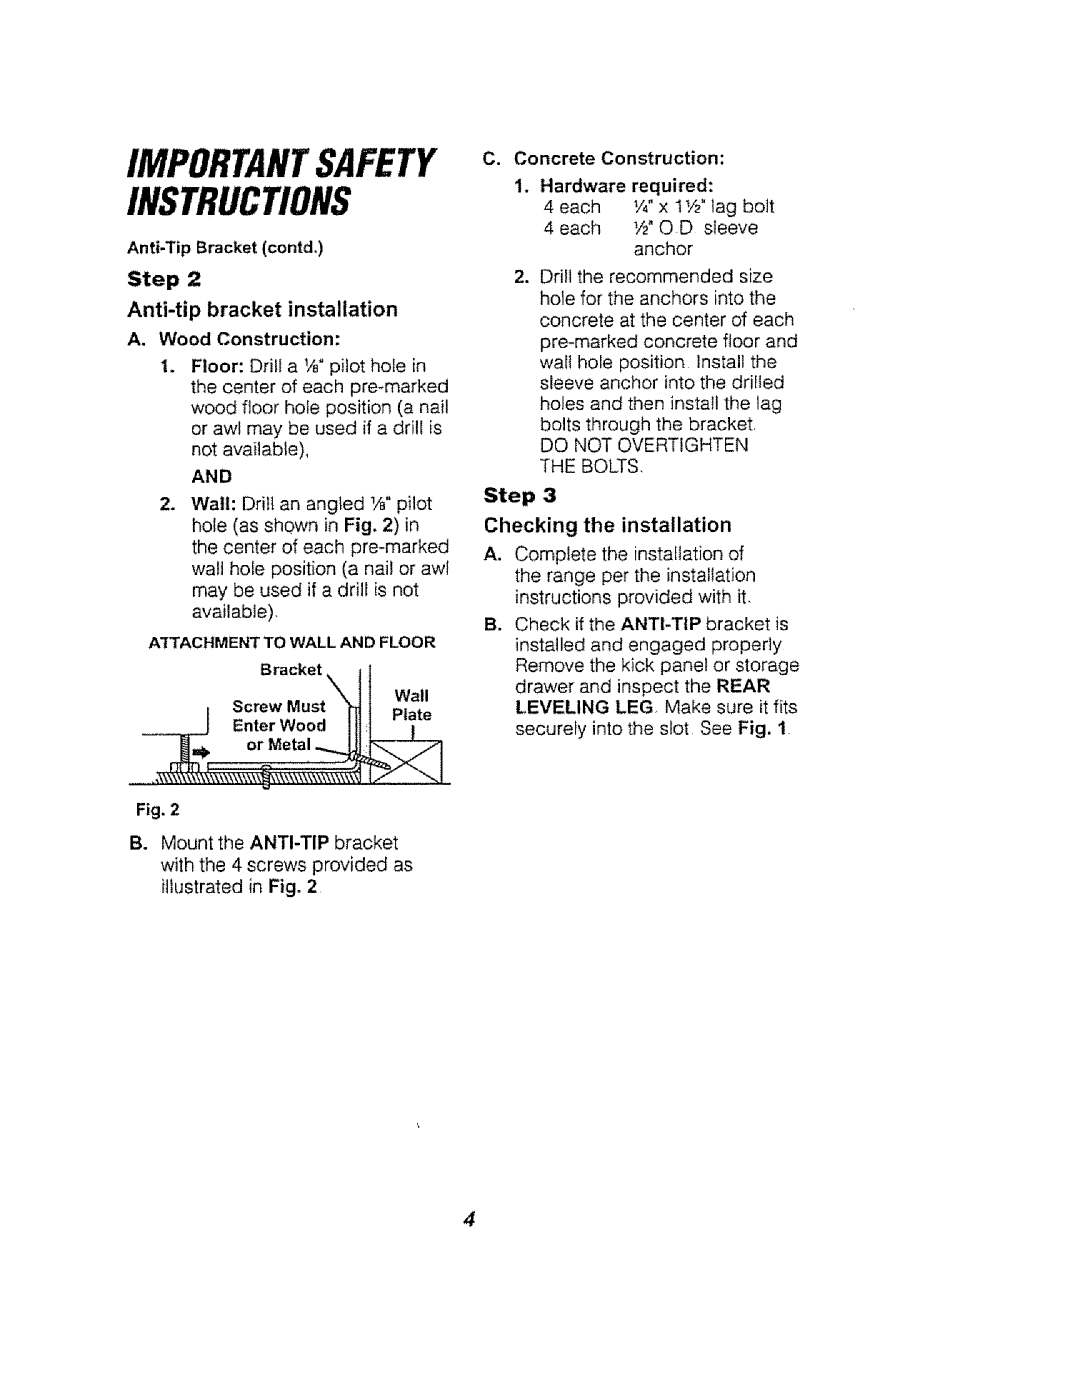 Kenmore 911.94752, 911.94754 manual Importantsafety Instructions, Step, Anti-tipbracket installation A. Wood Construction 